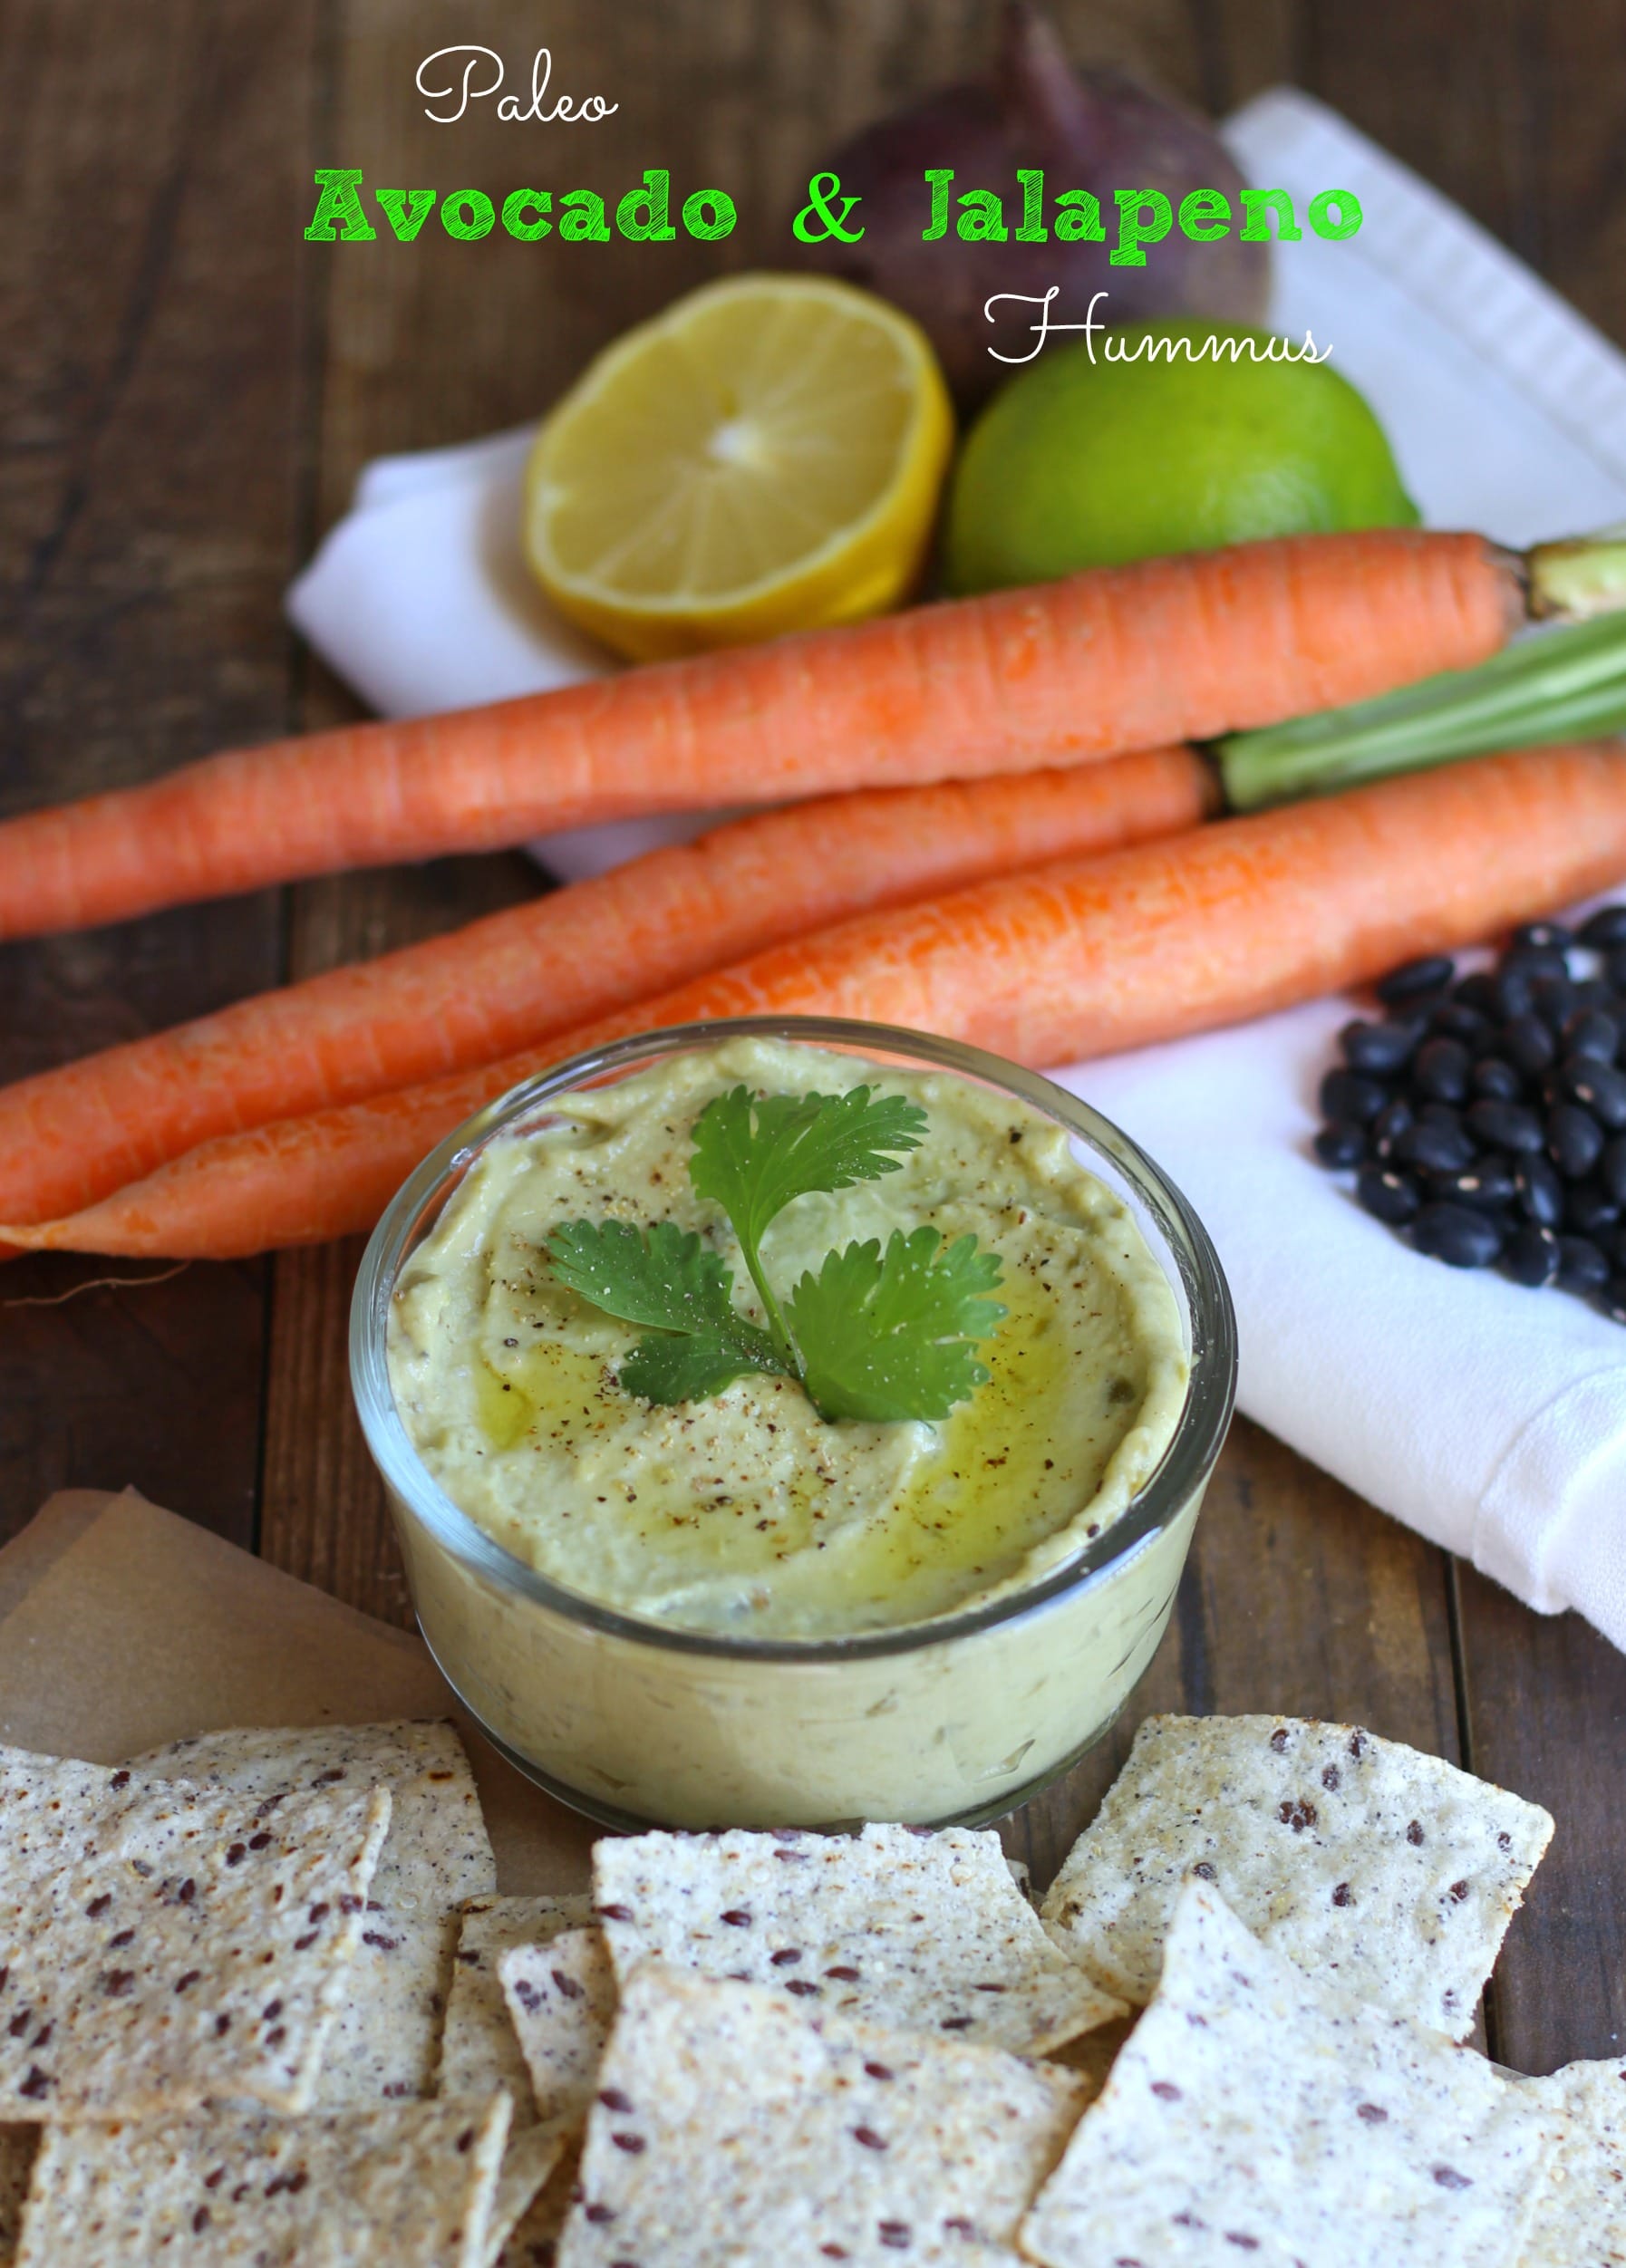 hese hummus recipes were created with you in mind focusing on your dietary needs without compromising the flavor, consistency and overall satisfaction that we all look for in a good hummus.